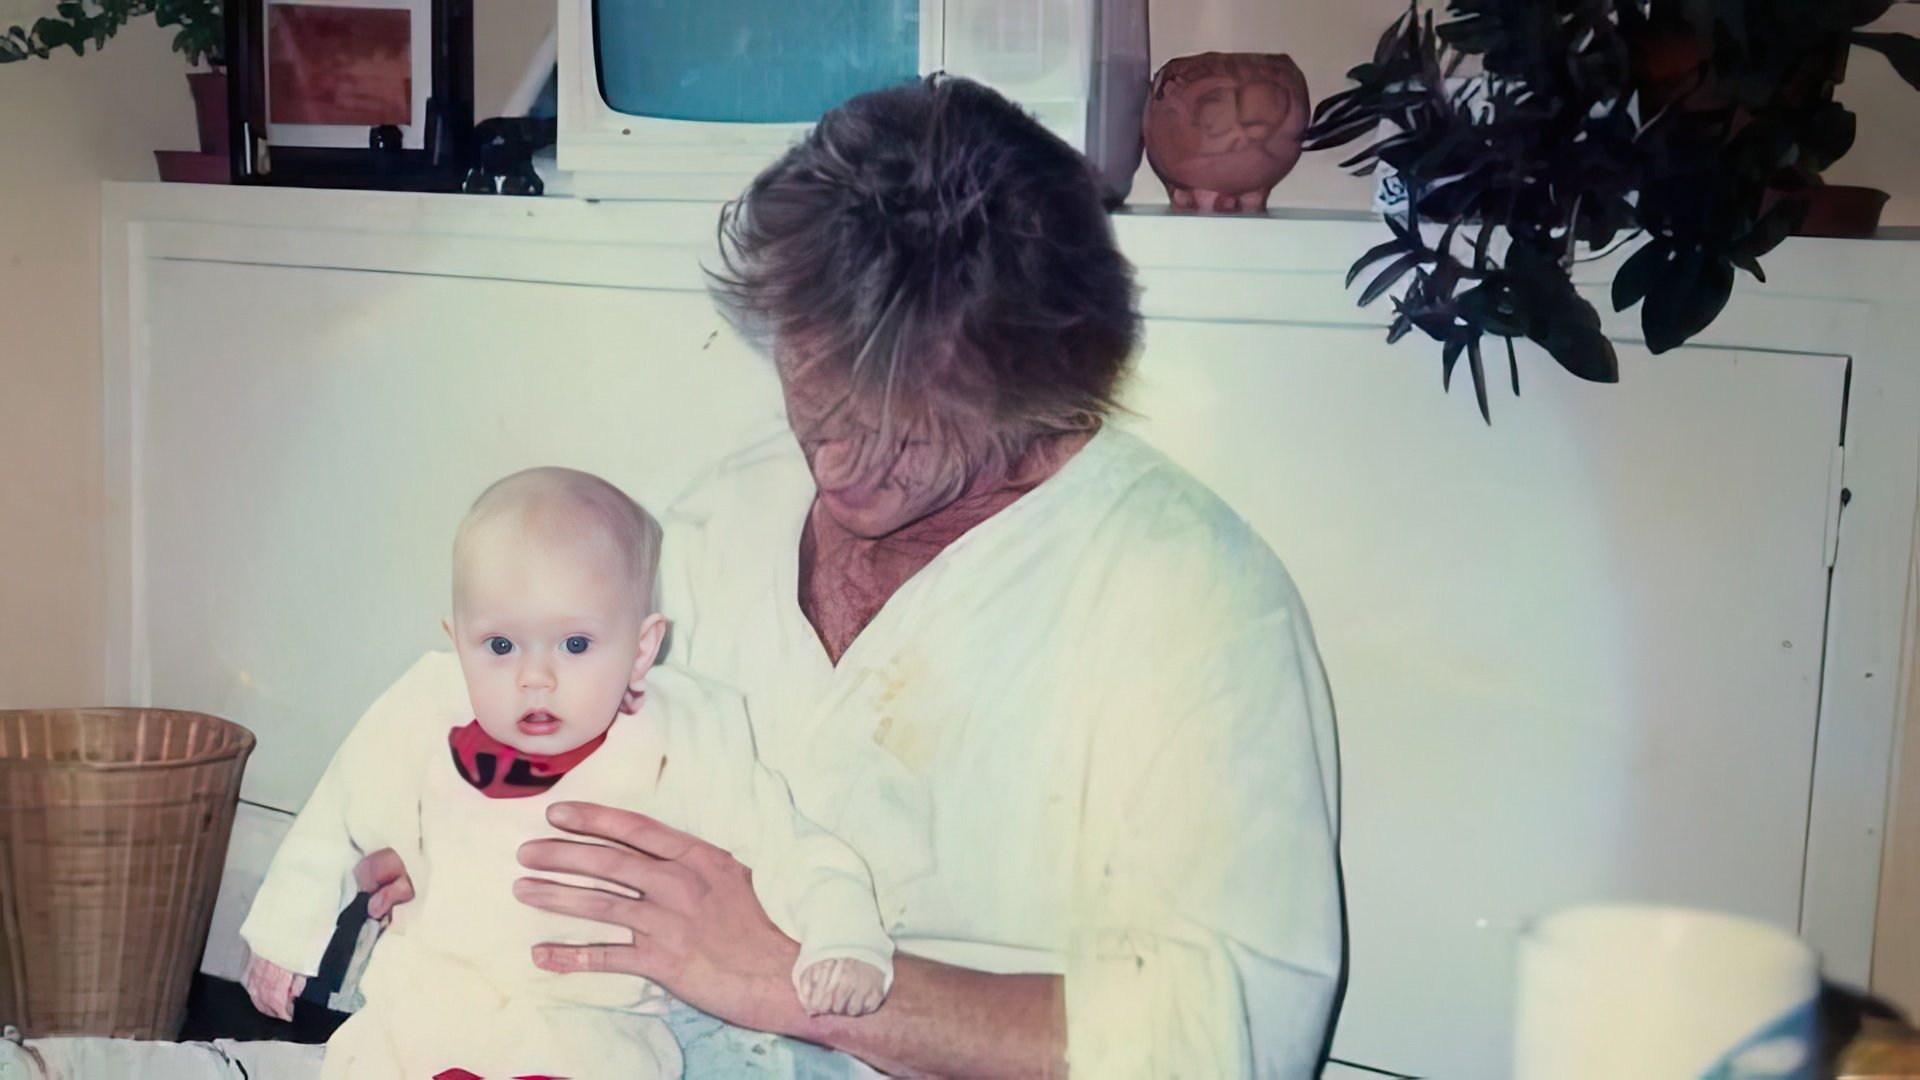 Adele’s father (on the photo) left when she was 3 years old